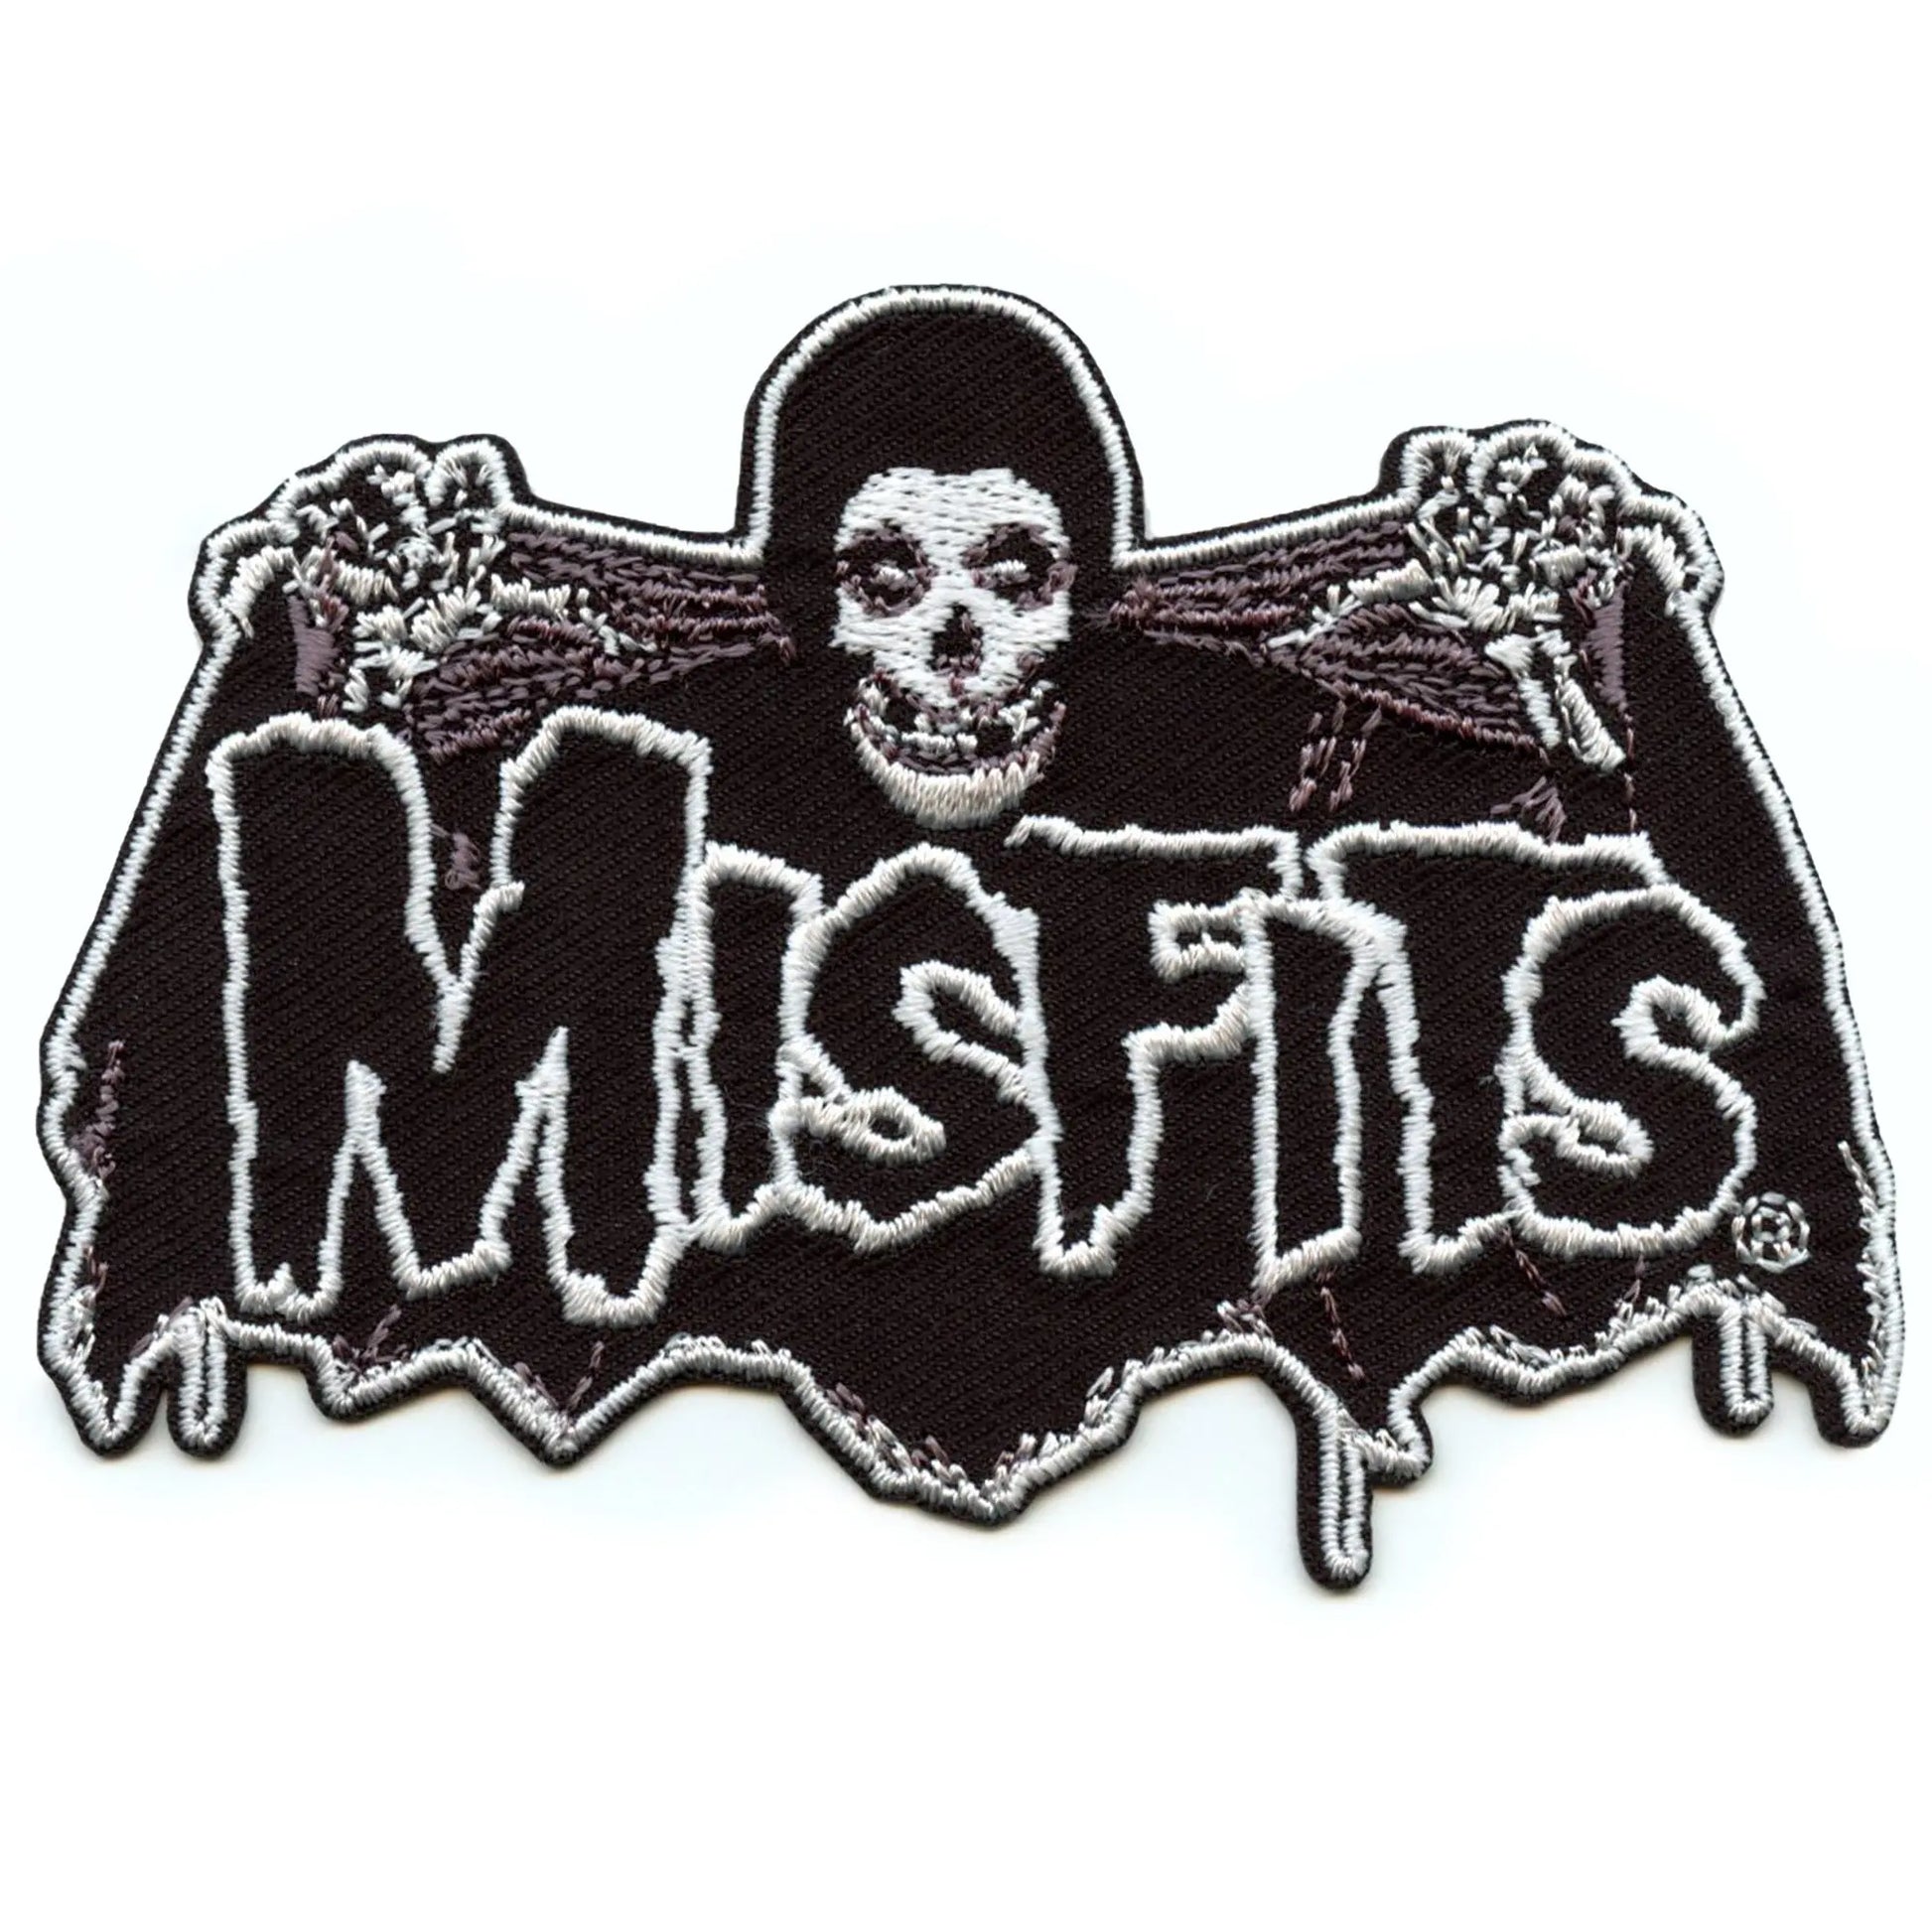 Skull Patches for Clothing, Punk Patches Black and White, Horror